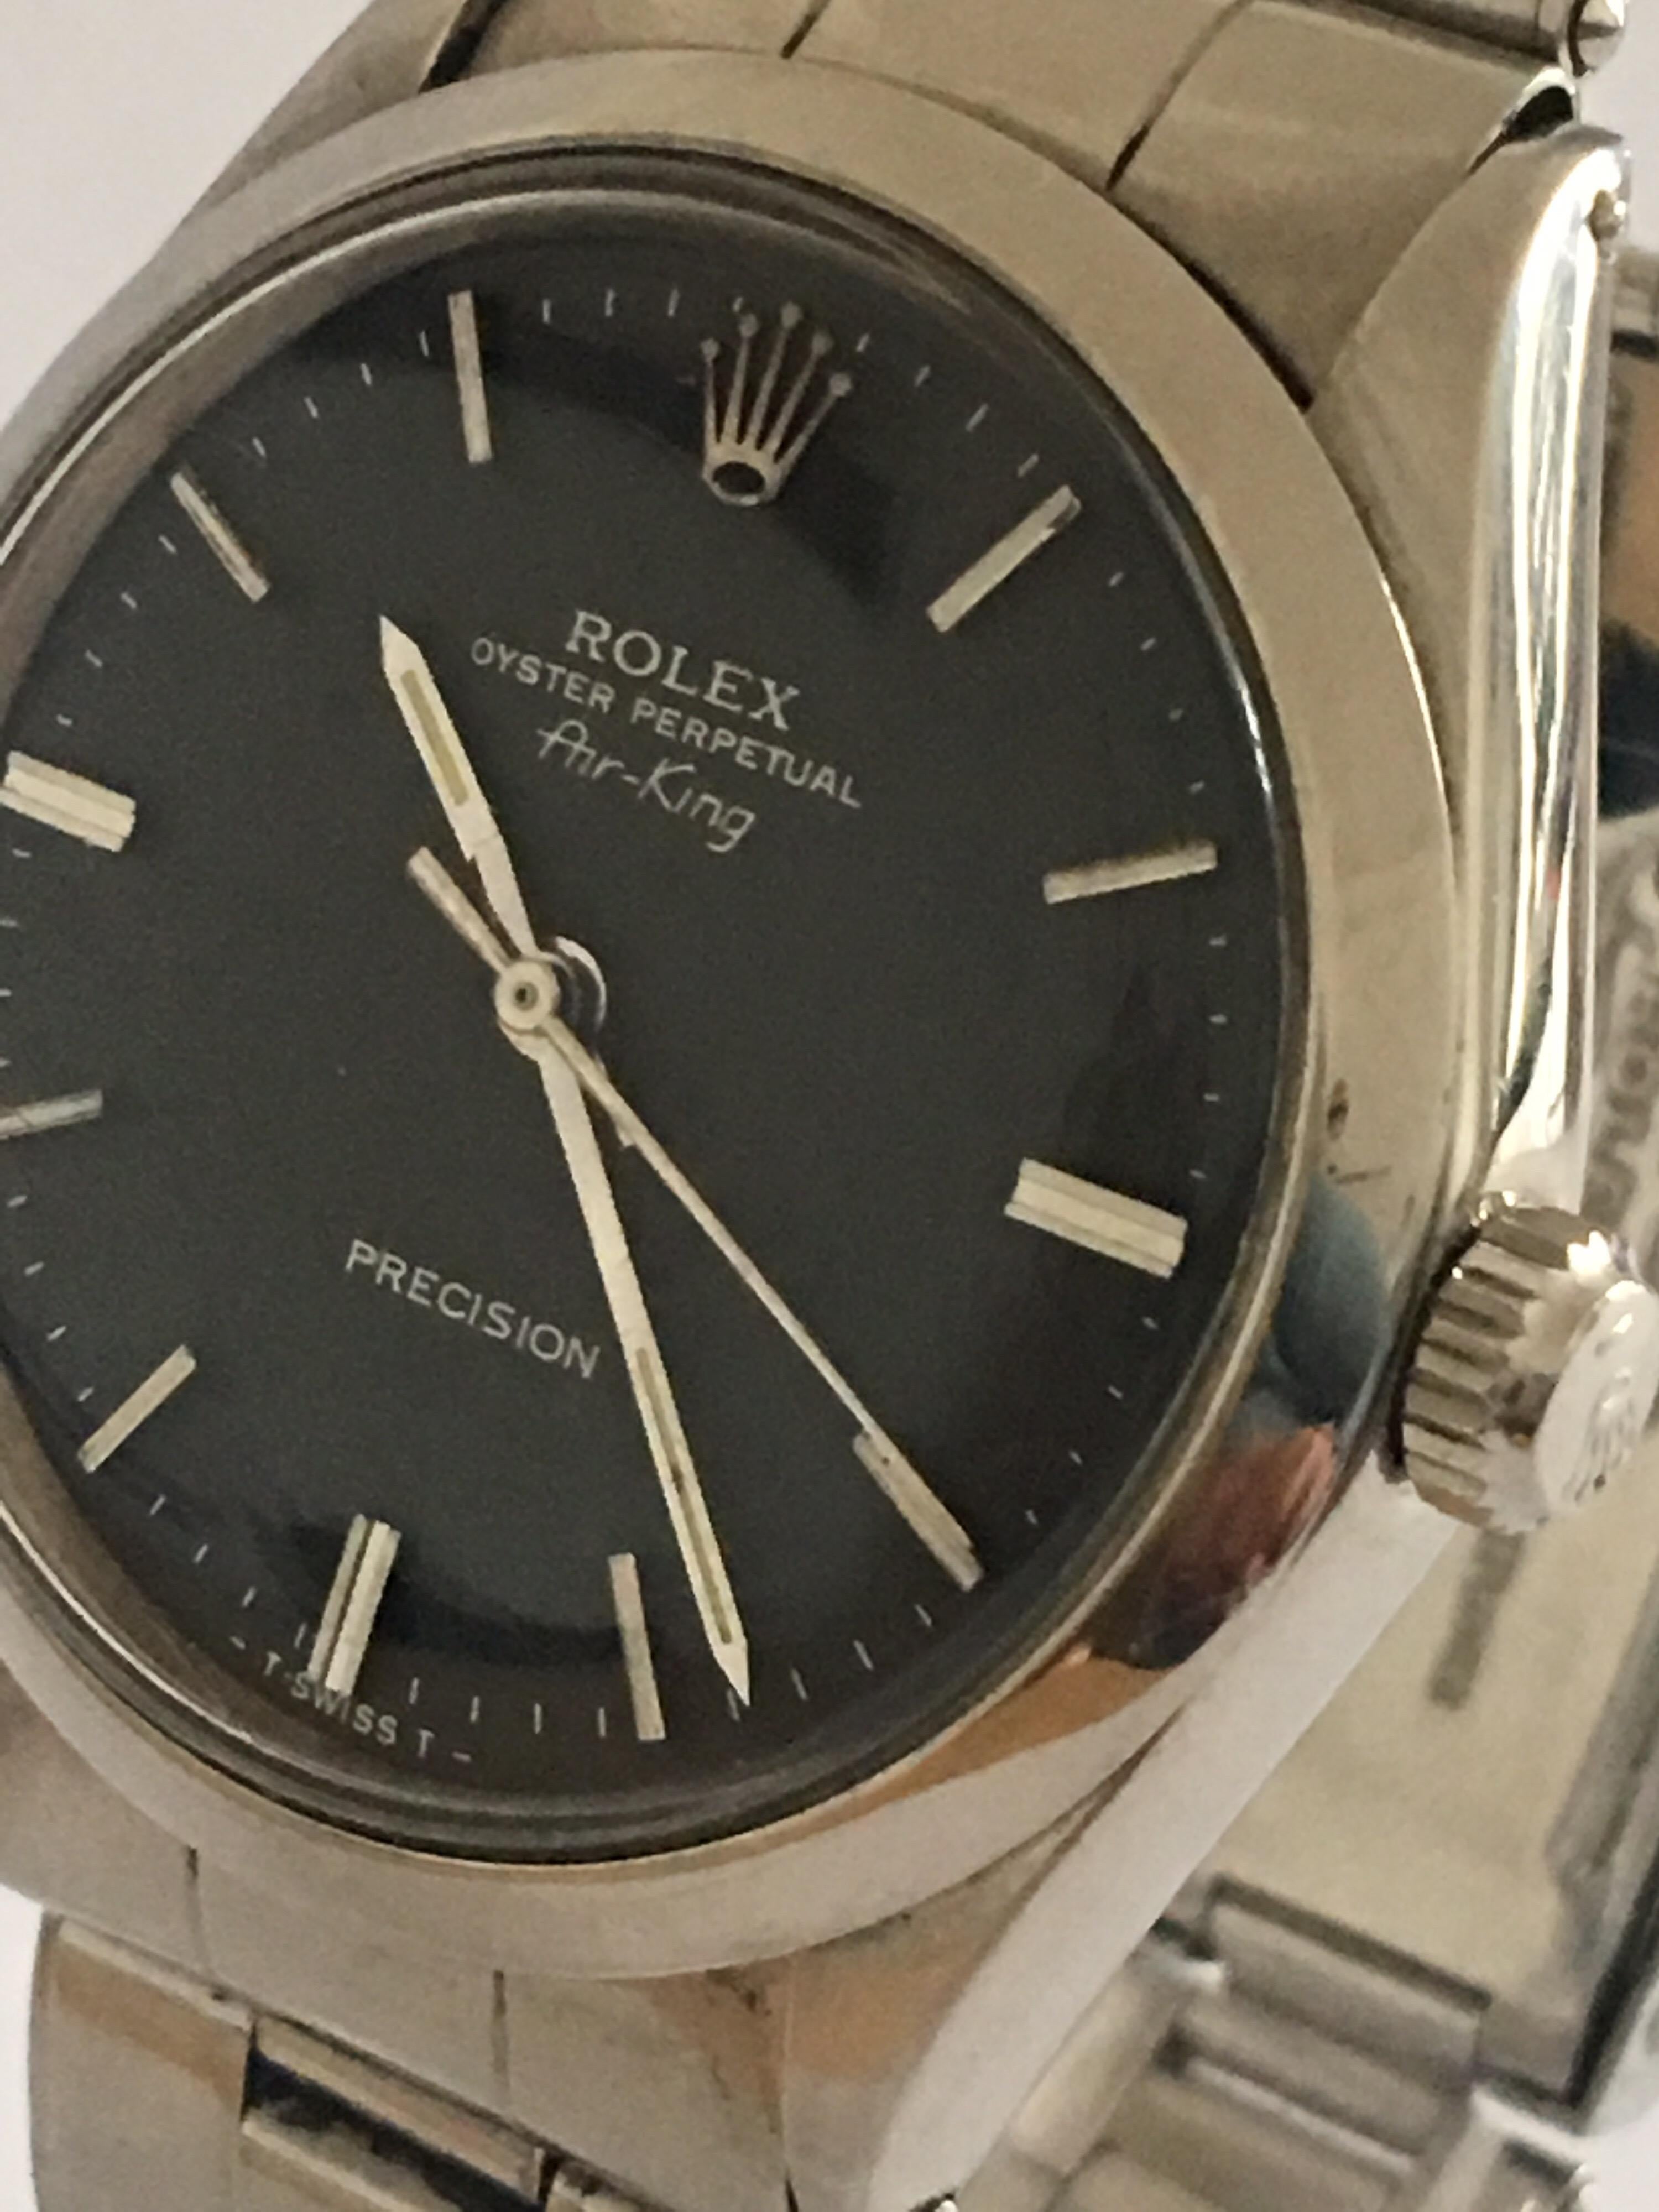 Vintage 1960s Rolex Oyster Perpetual Air-King Precision, 1520 For Sale 12